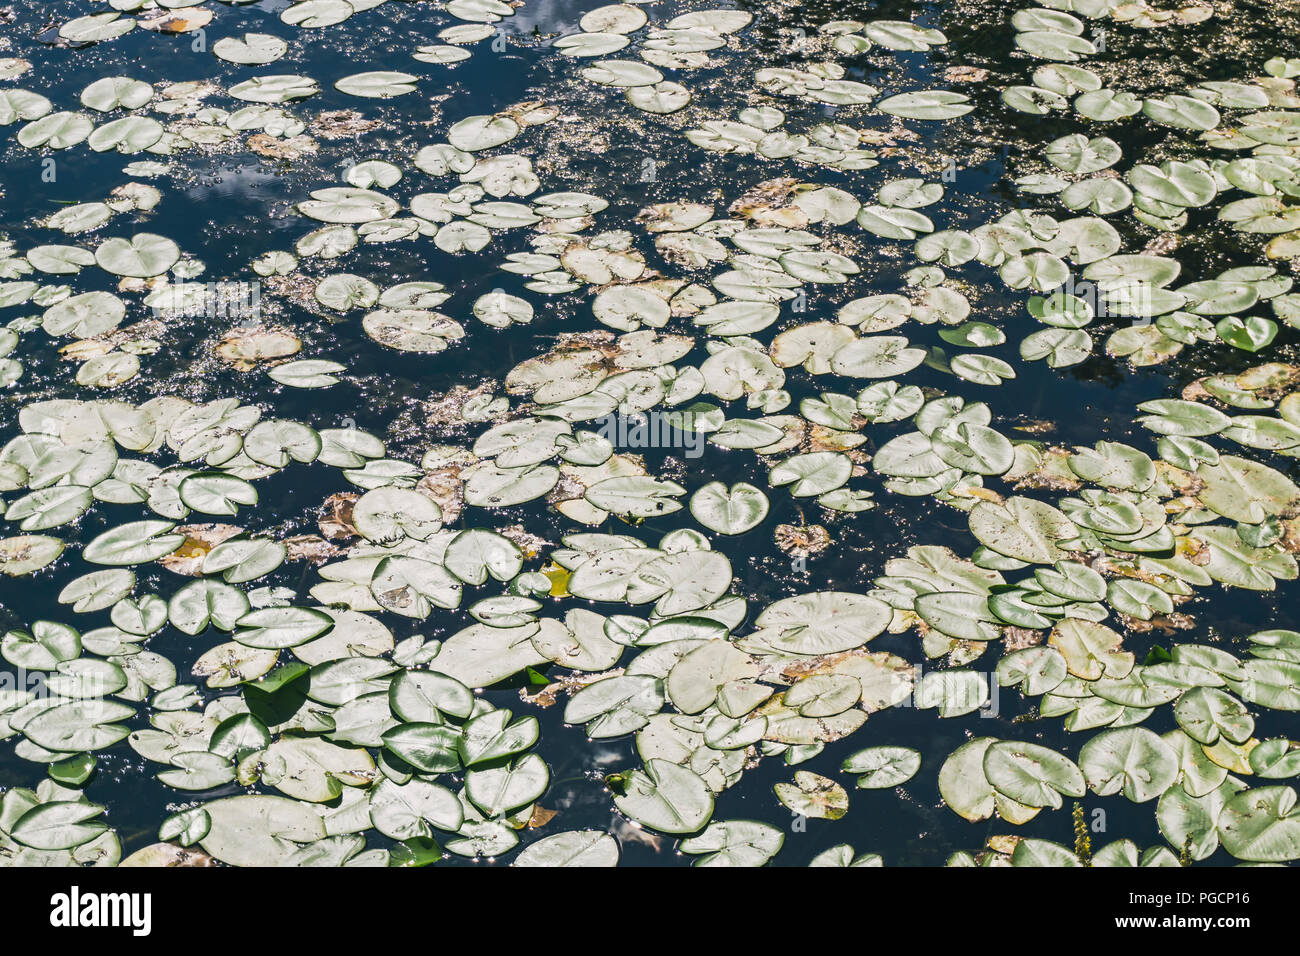 Berlin, Germany, July 25, 2018: Close-Up of a Carpet of Water Lilies Floating on Spandau Citadel Canal Stock Photo